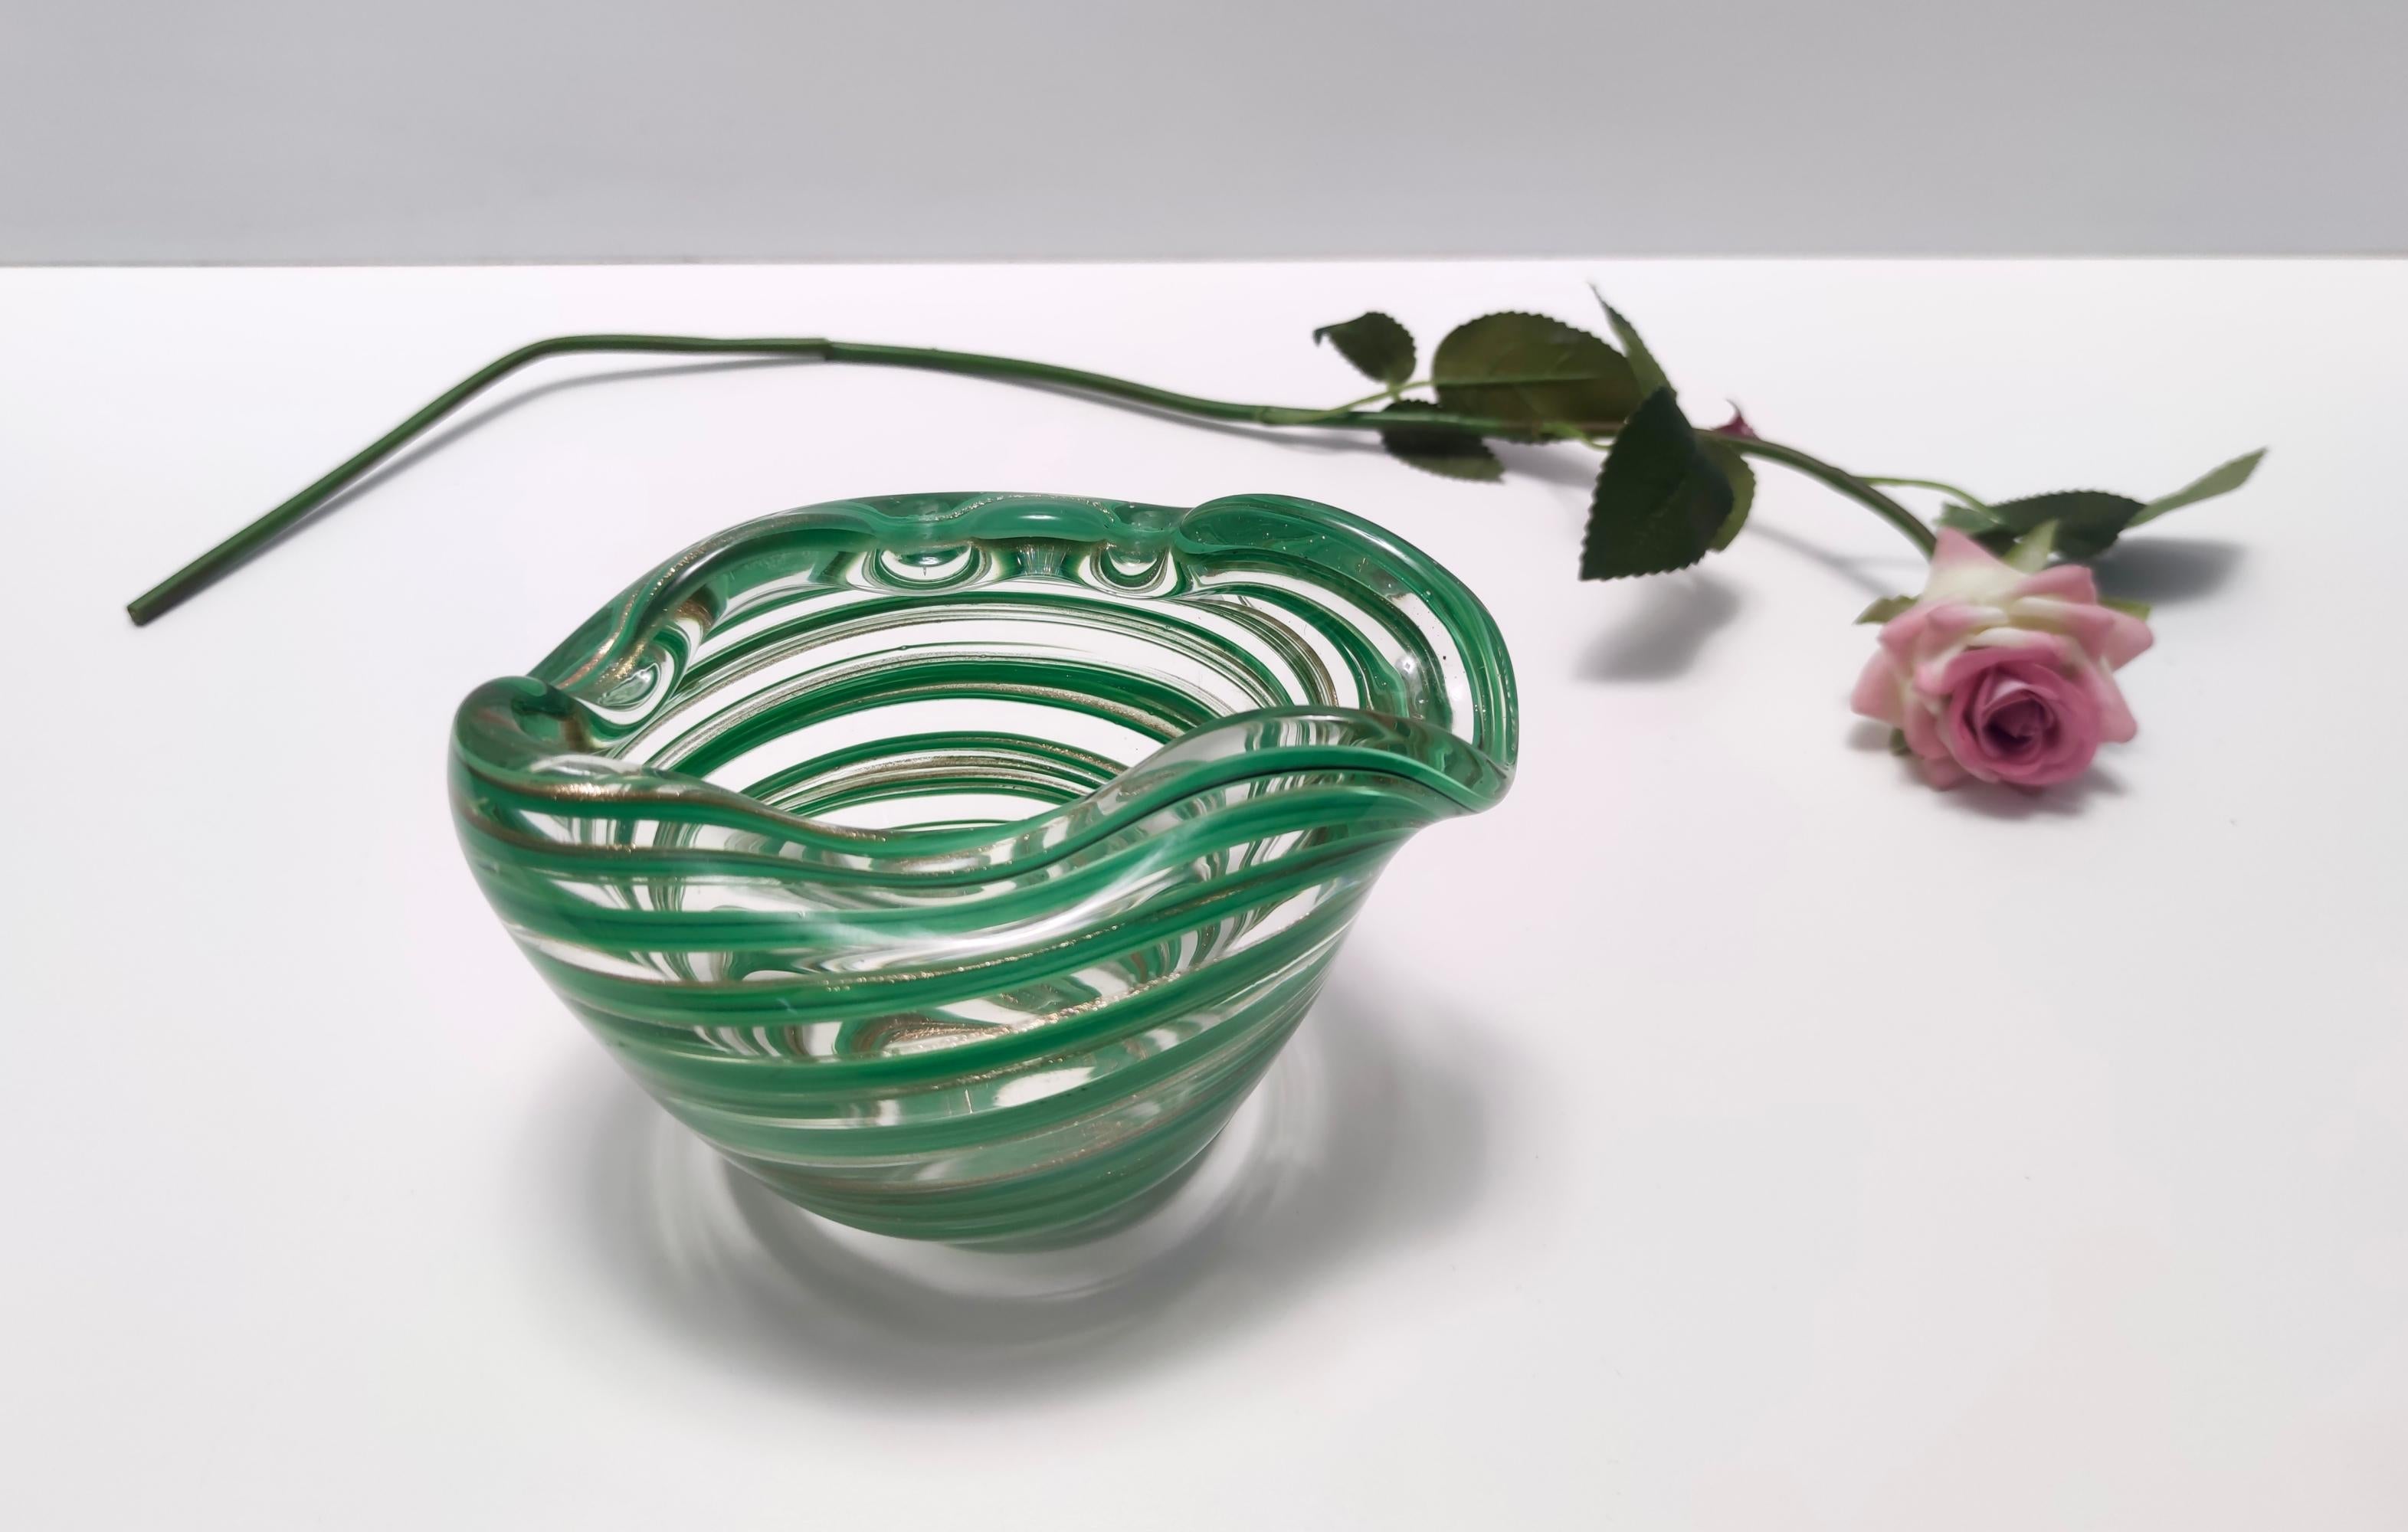 Made in Italy, 1950s. 
This is a thick Murano glass bowl / ashtray / vide-poche ascribable to Alfredo Barbini because of its wavy rims. 
It is made with Murano glass and green canes with aventurine glass. 
This is a vintage piece, therefore it might